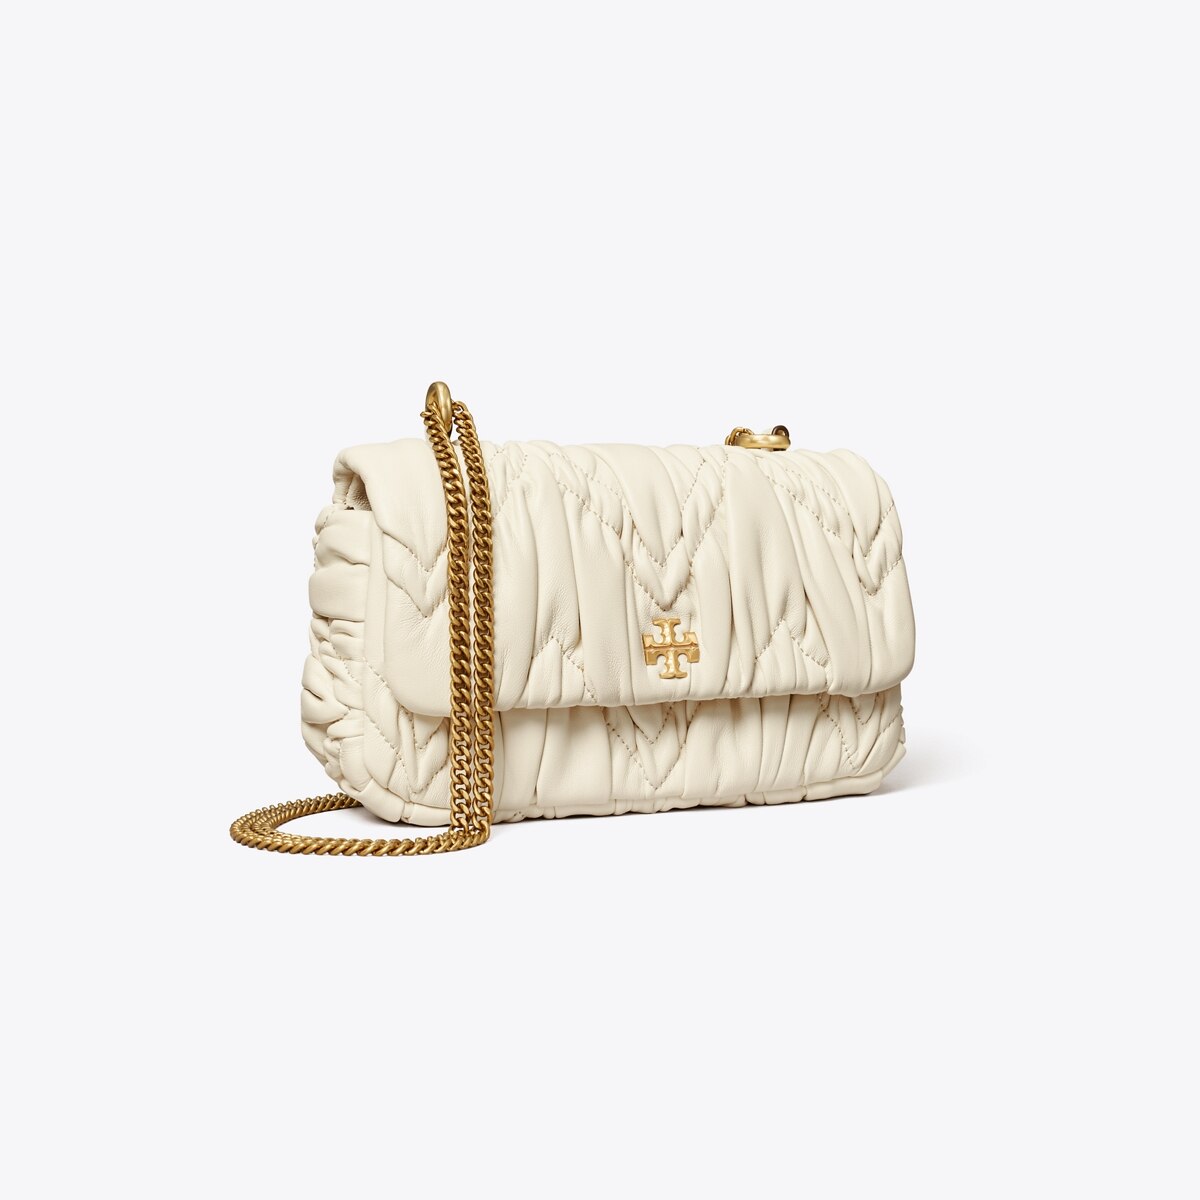 Tory Burch Kira Mini Bag in Quilted Leather